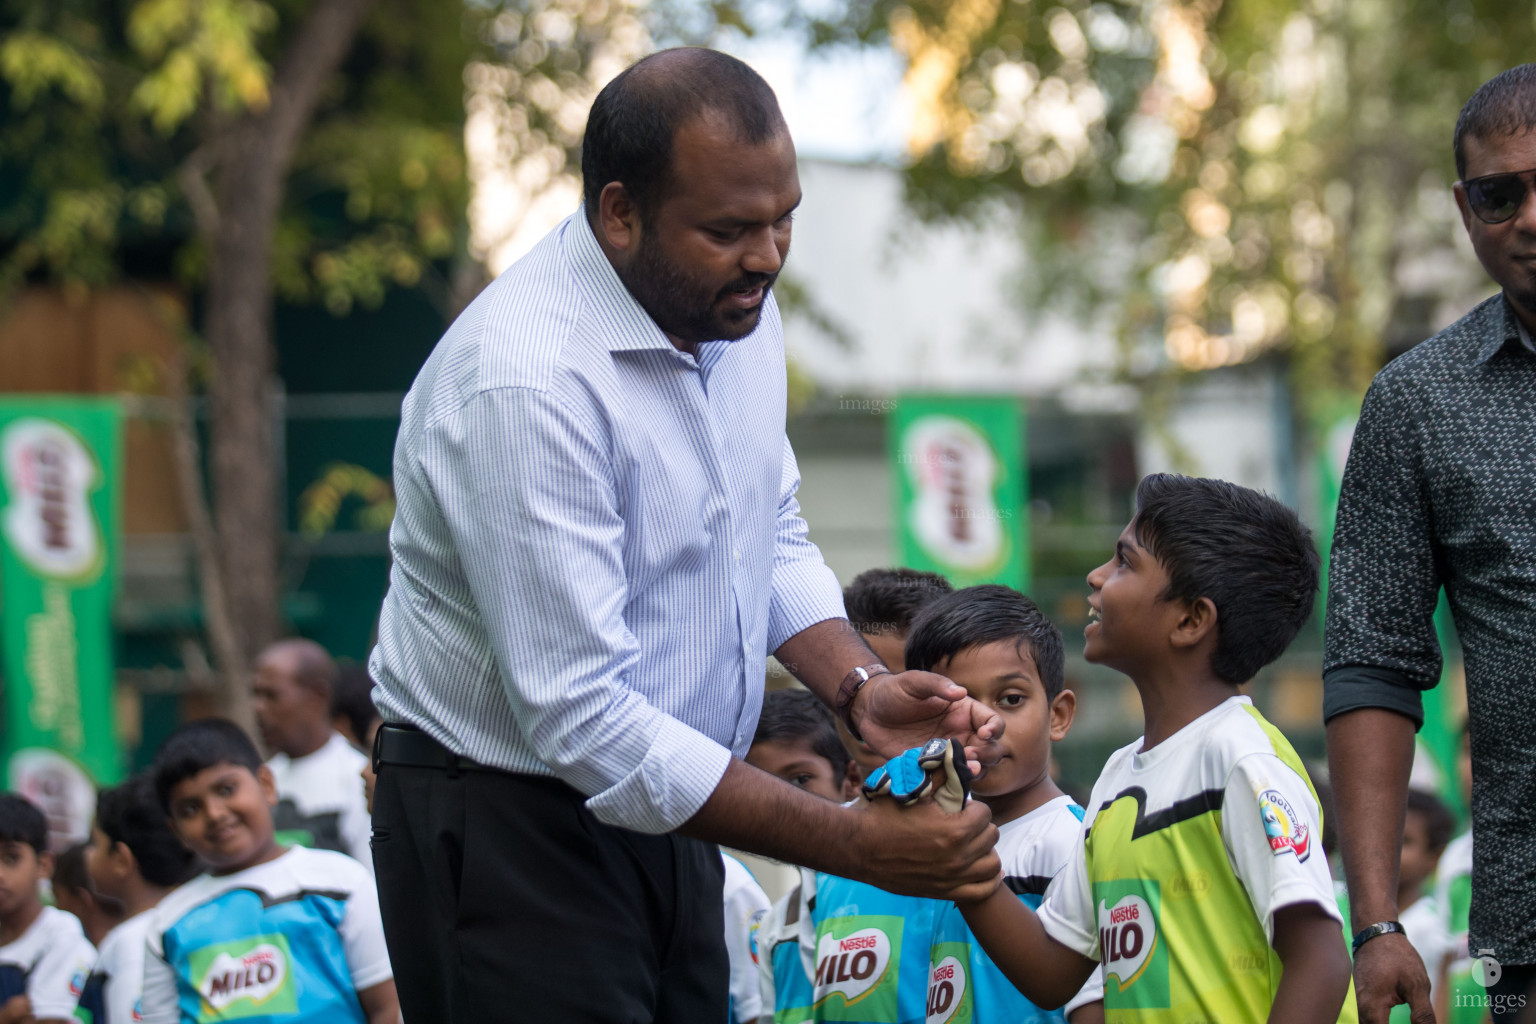 Opening Ceremony of Milo Kids Football Fiesta in Henveiru Grounds in Male', Maldives, Wednesday, Fe20uary 19th 2019 (Images.mv Photo/Suadh Abdul Sattar)